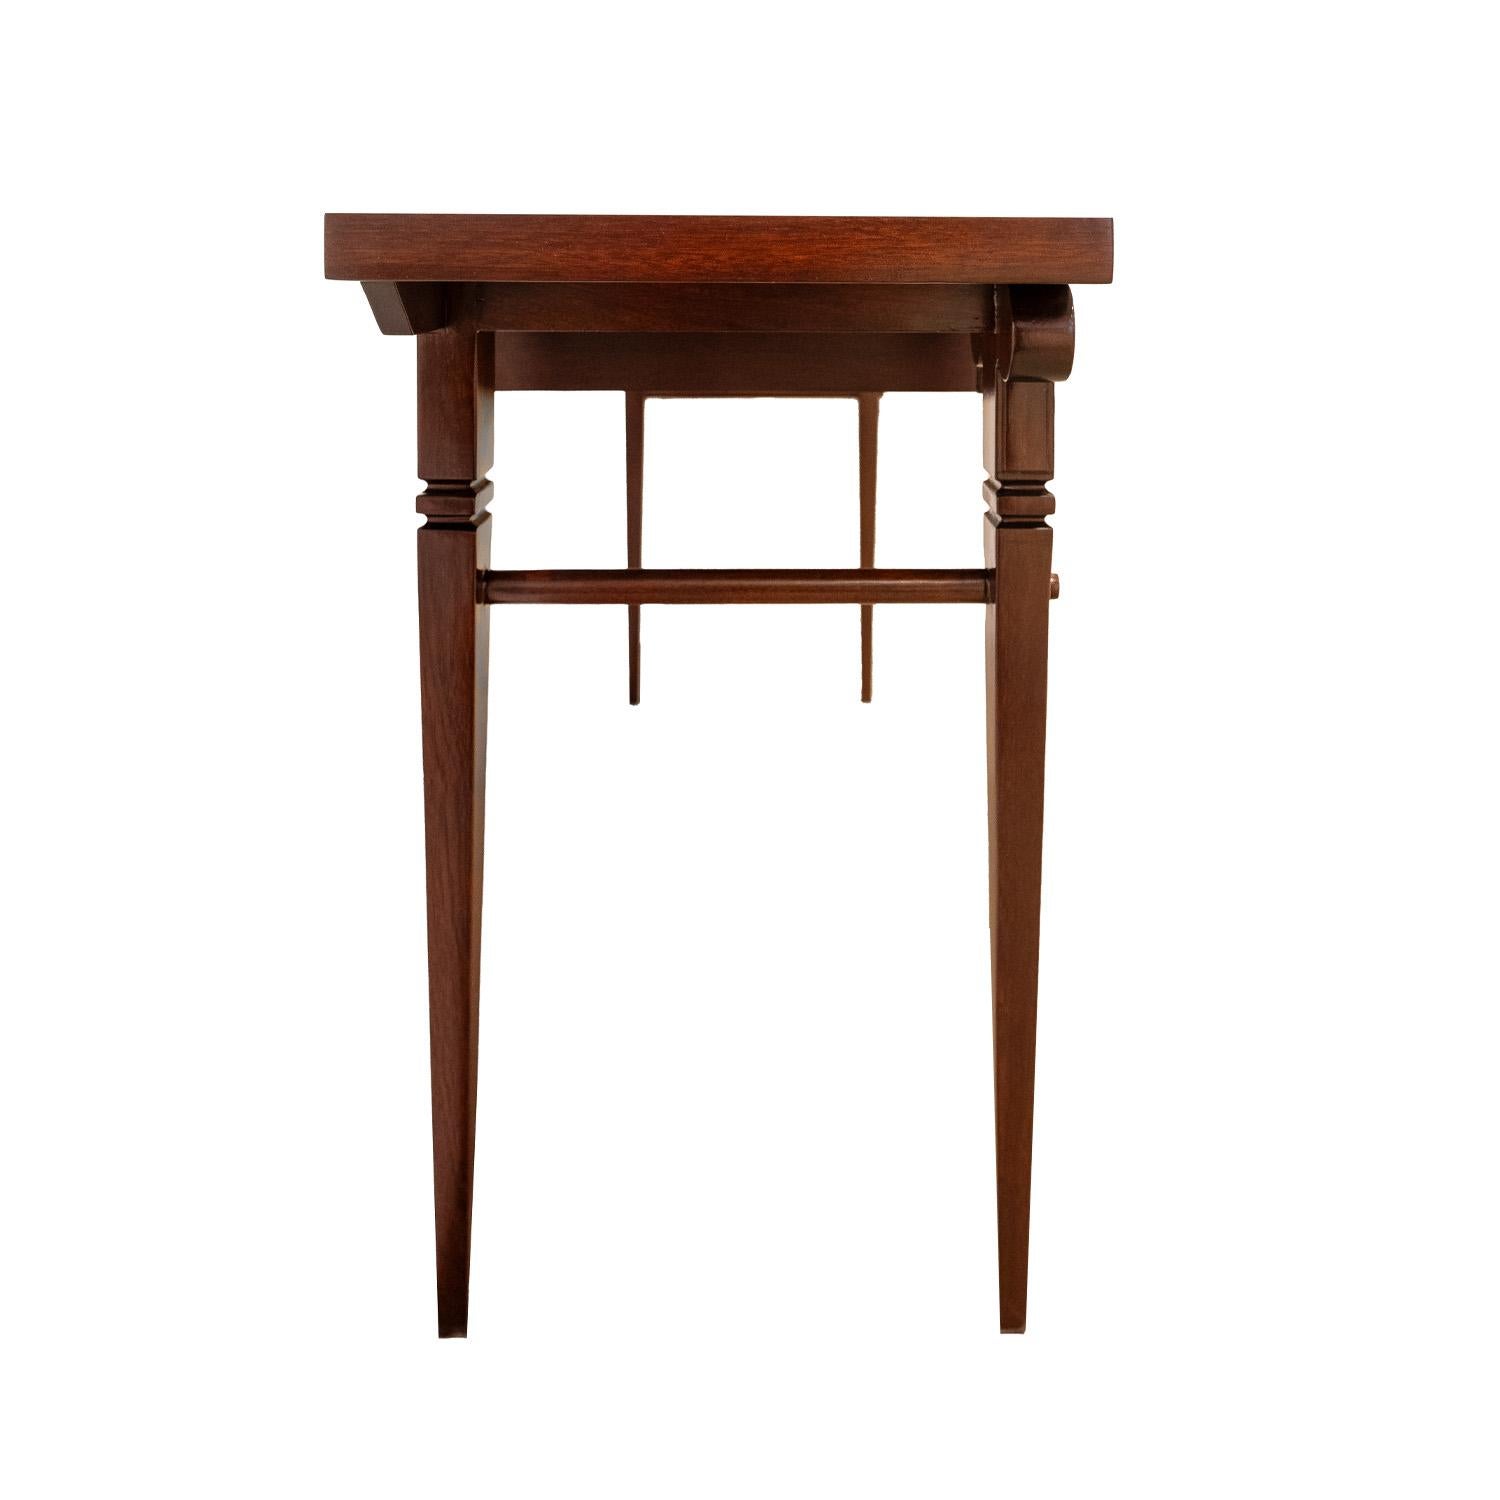 American Tommi Parzinger Neoclassical Style Console Table in Mahogany 1960s For Sale